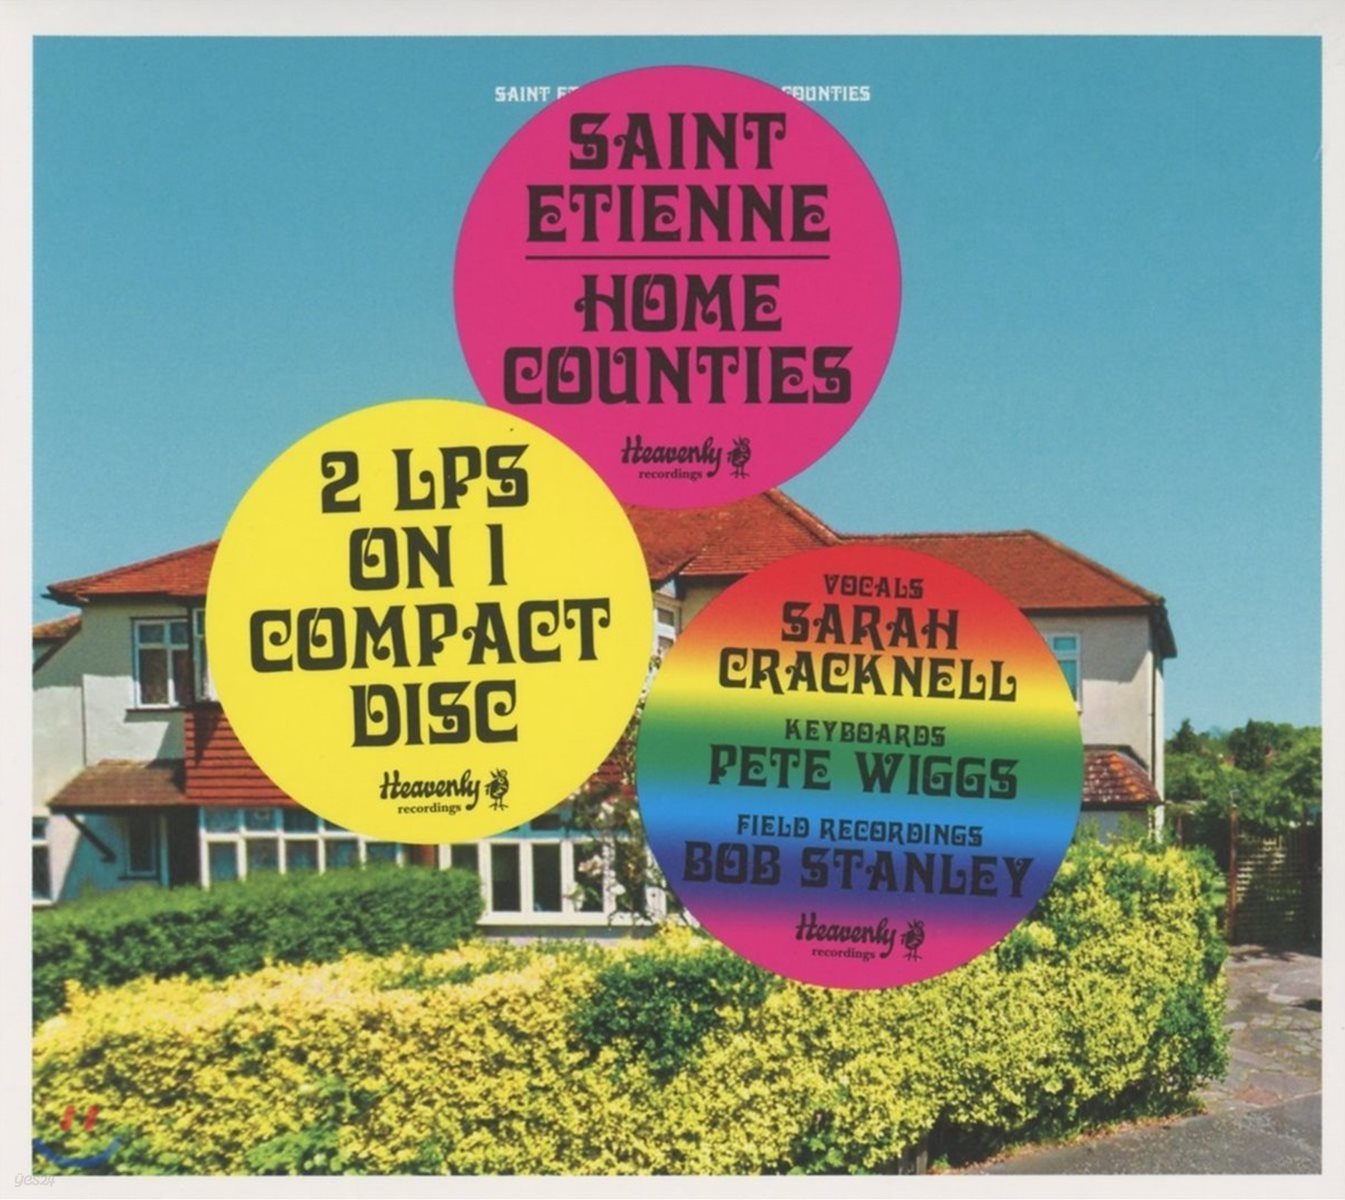 Saint Etienne (세인트 에티엔) - Home Counties